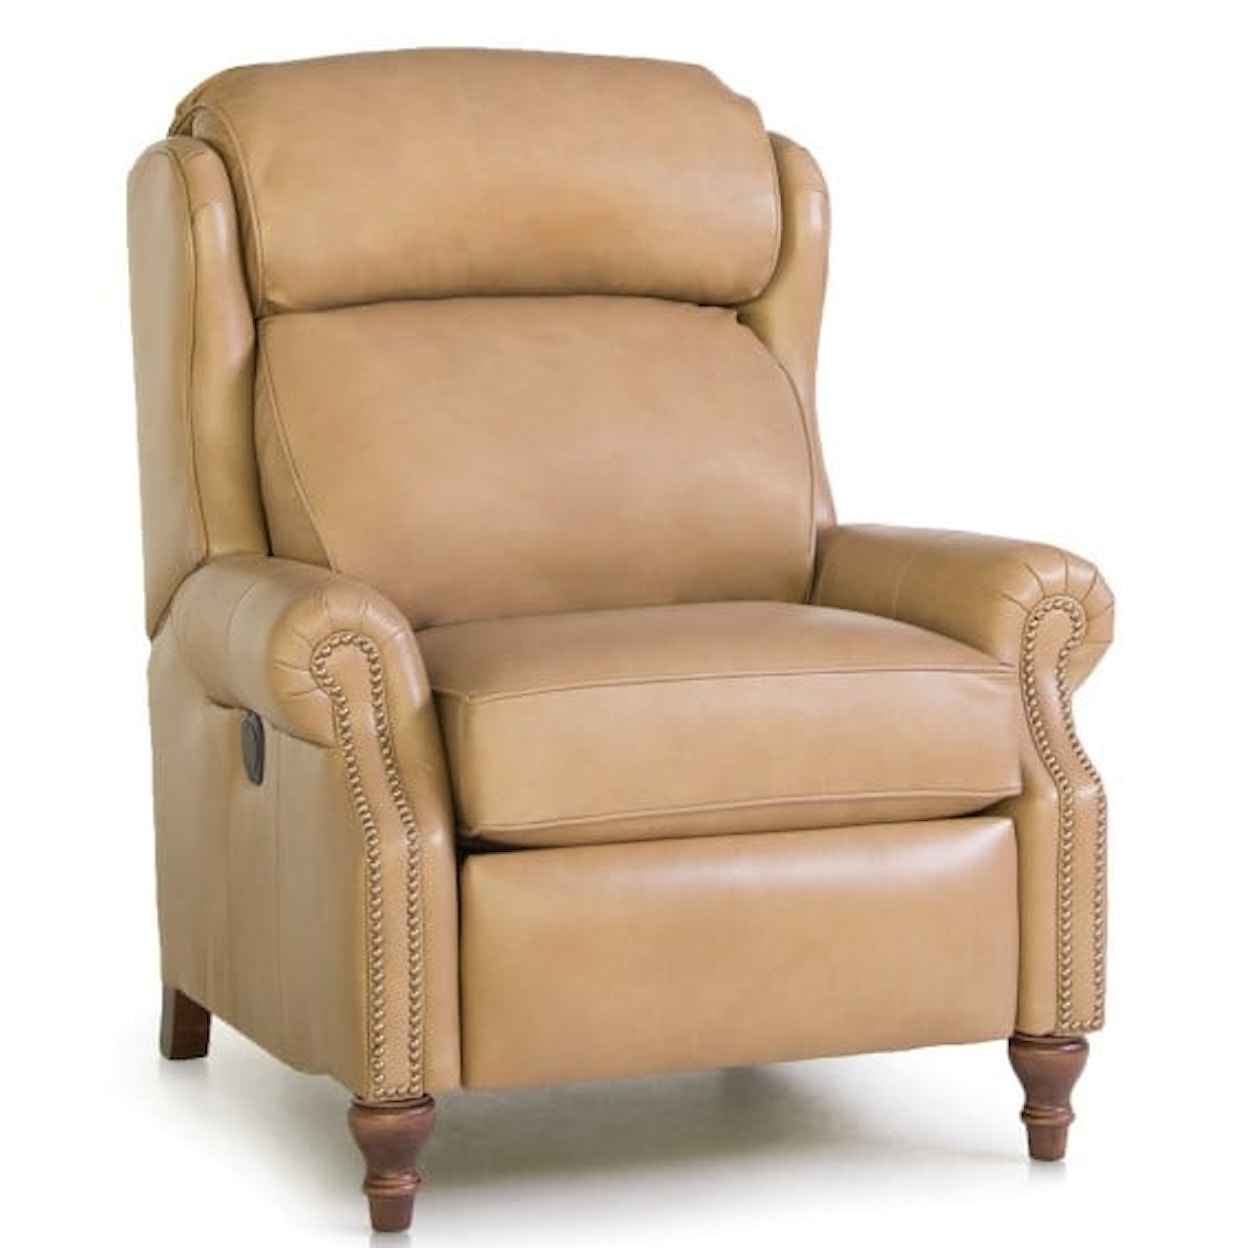 Smith Brothers 732 Power Recliner